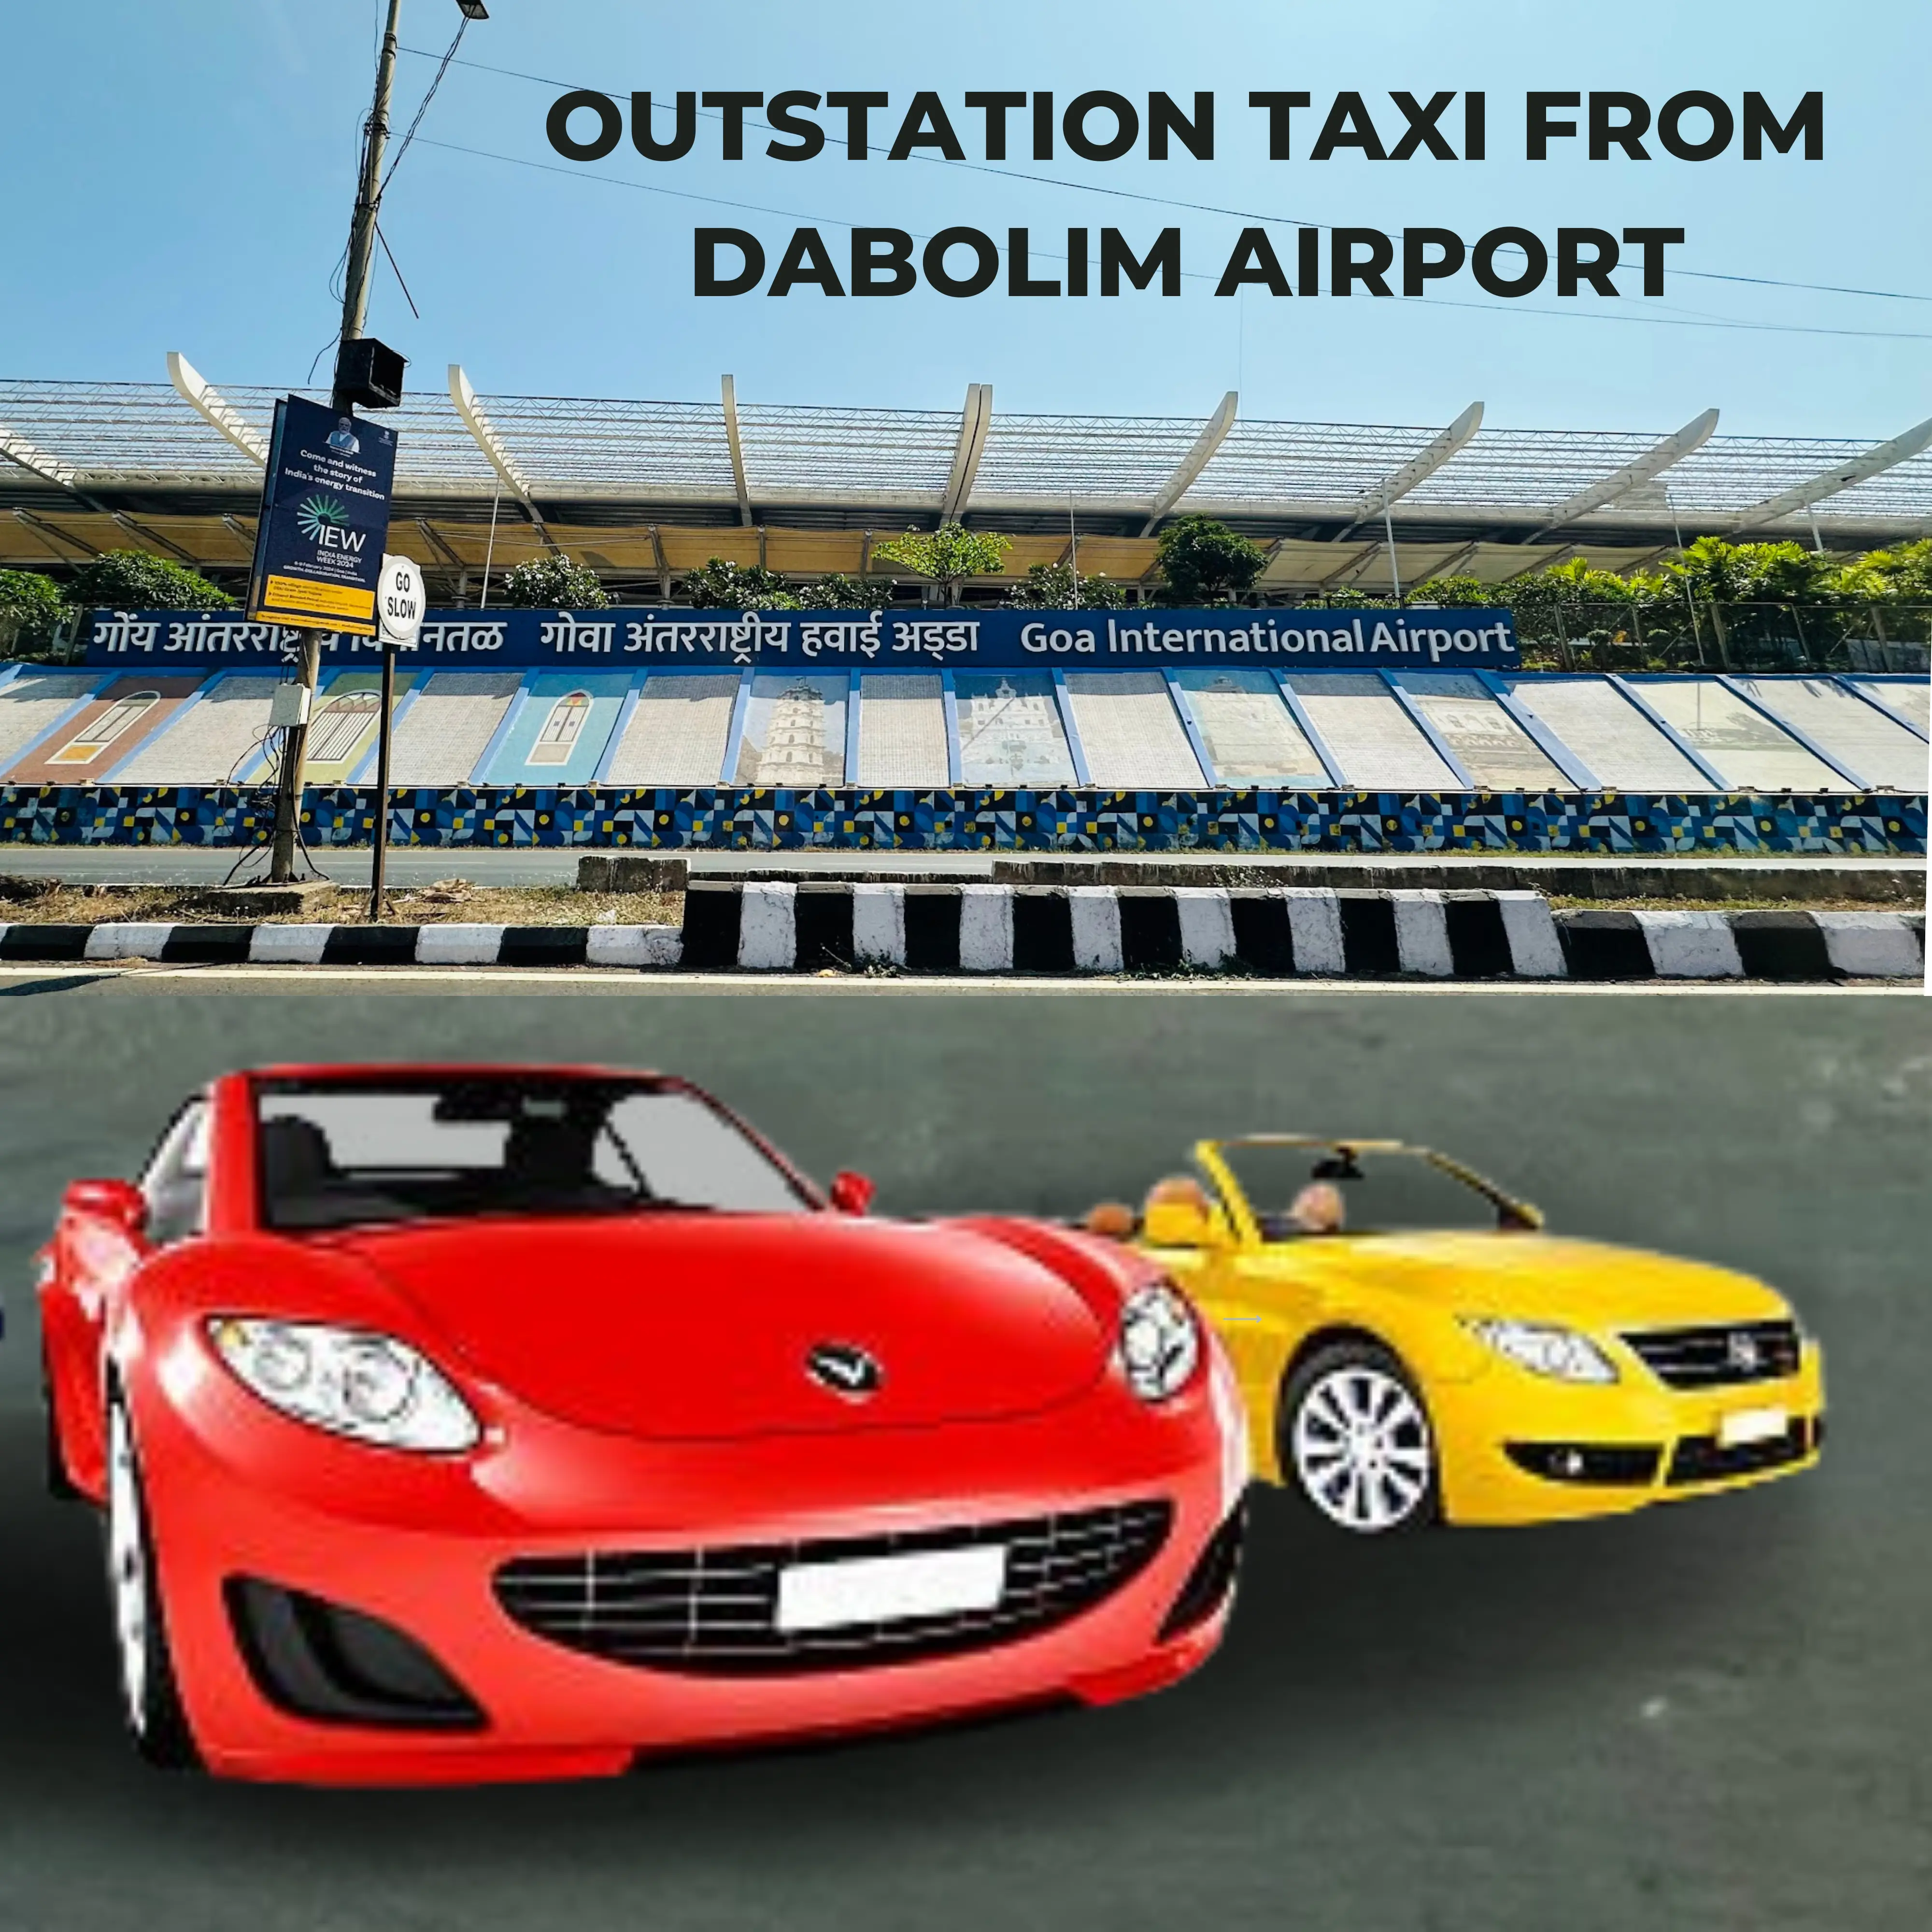 Outstation Cabs from Dabolim Airport